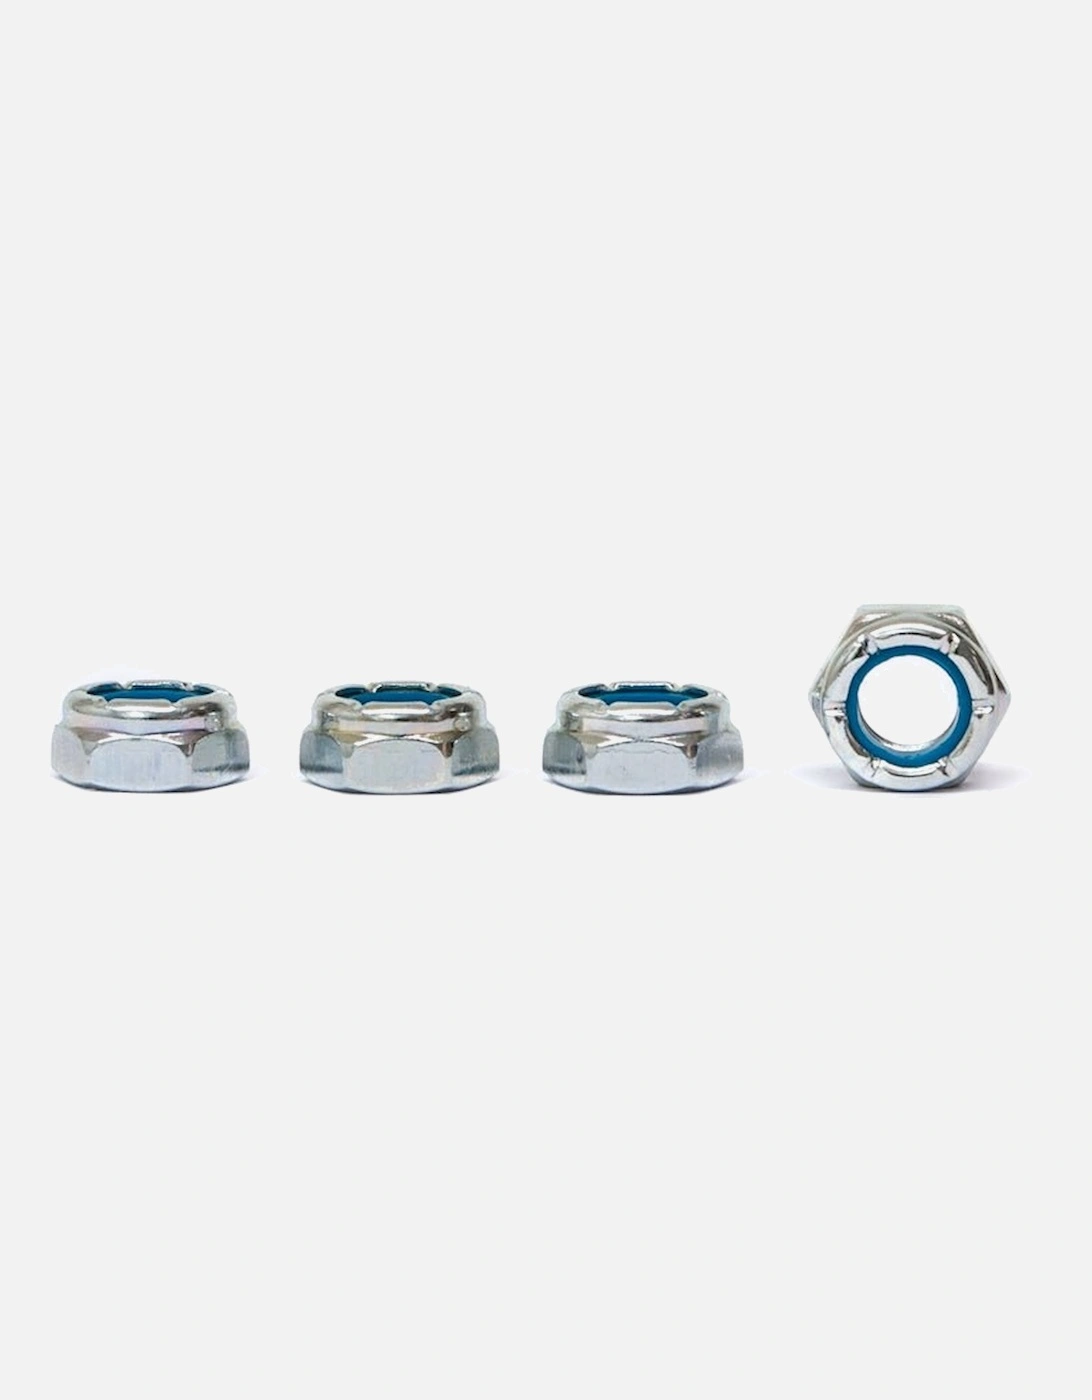 Axel Nuts - Set of 4, 2 of 1